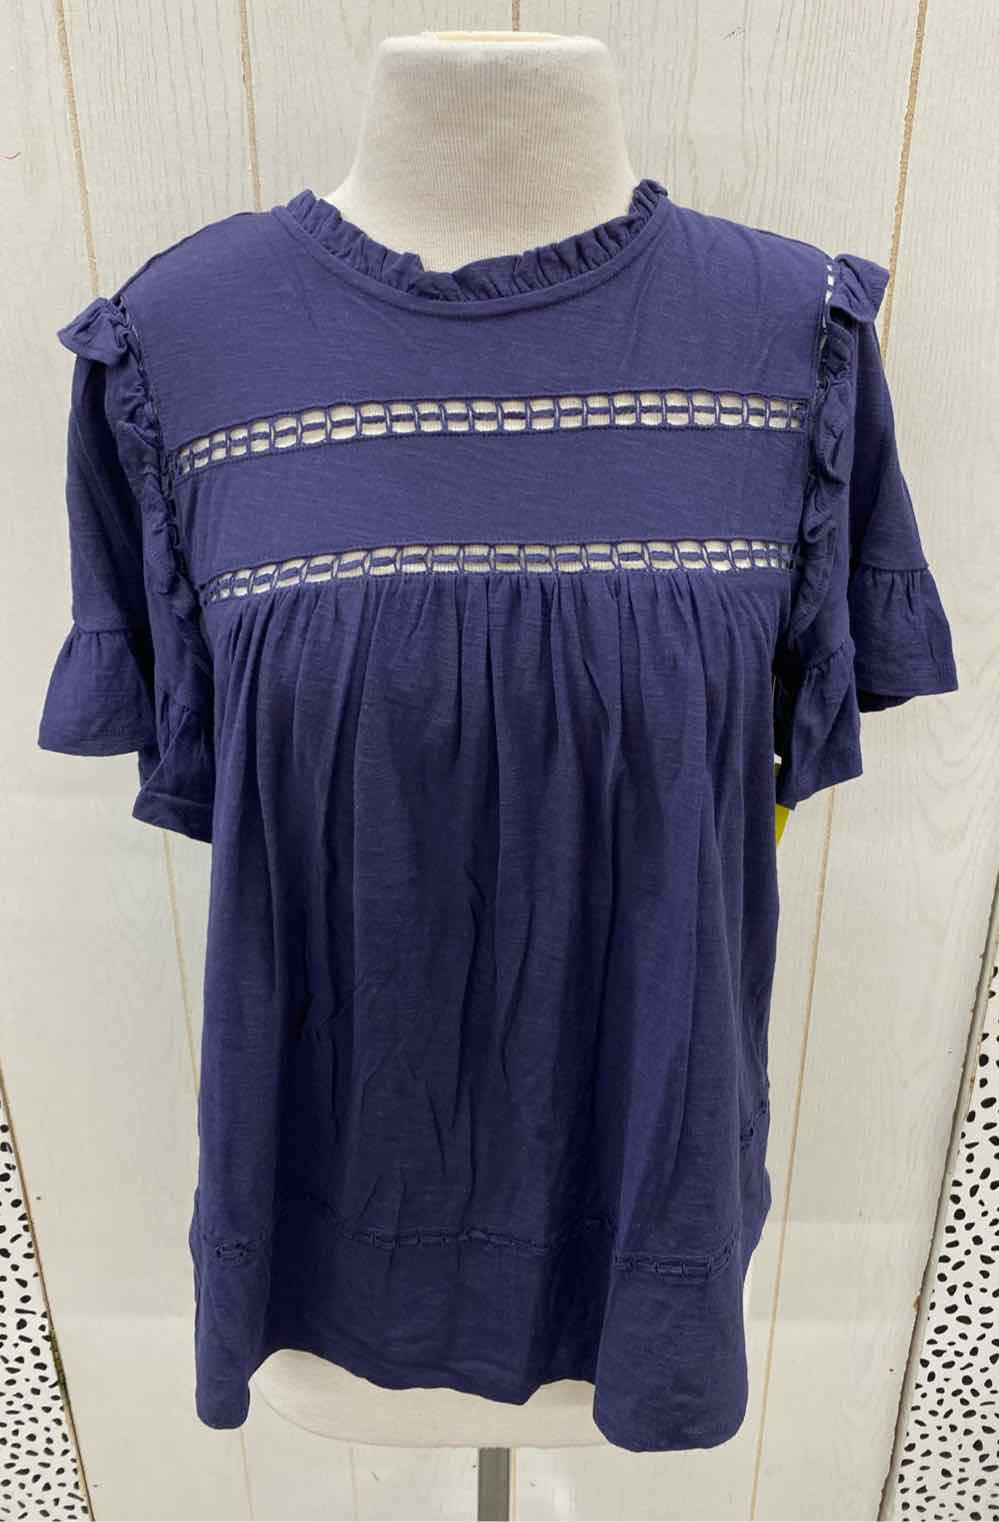 Maurices Navy Womens Size M Shirt